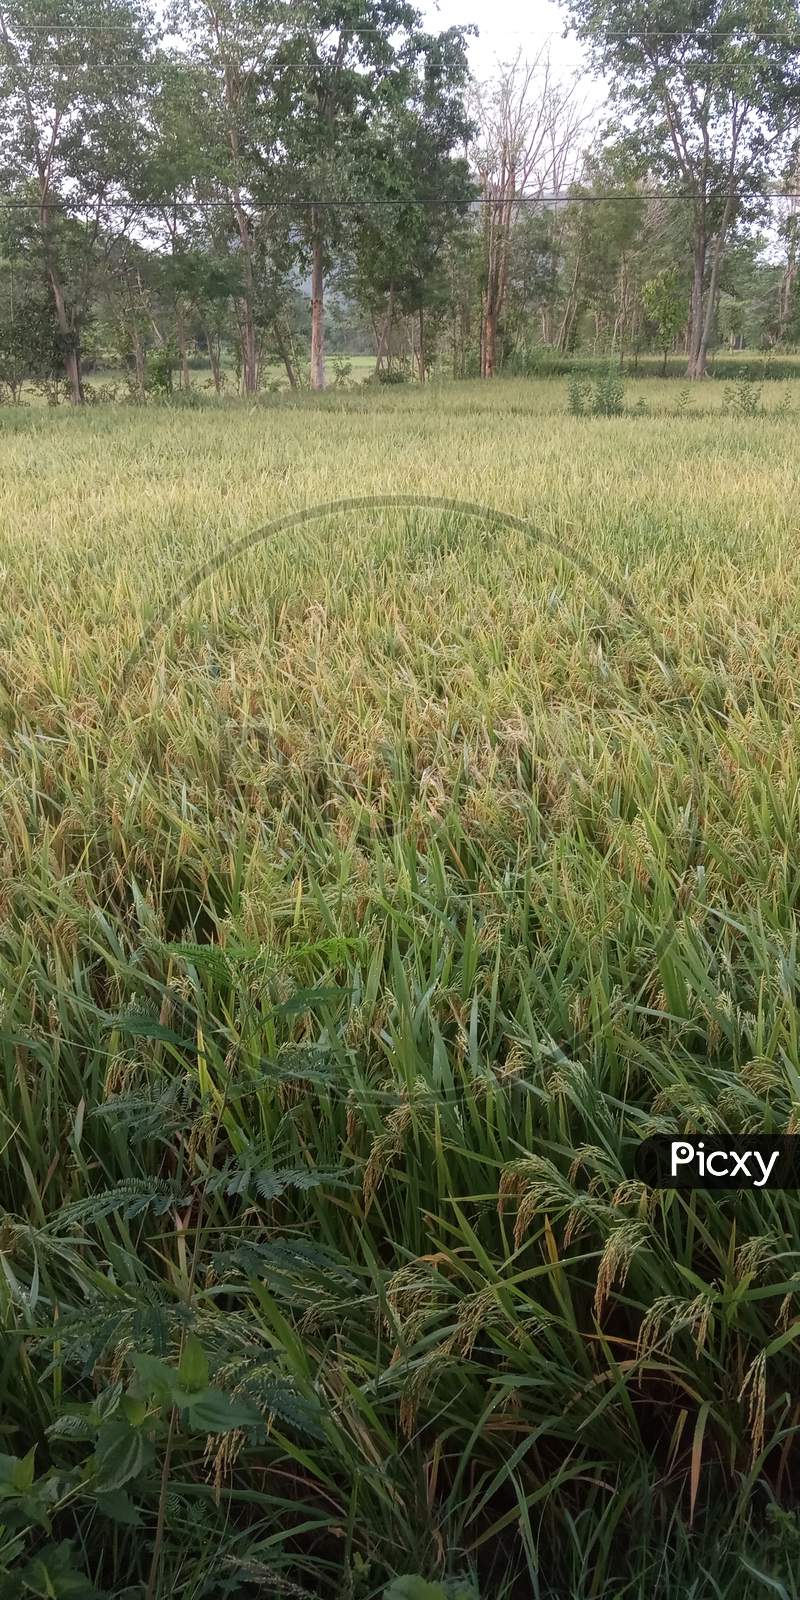 Rice paddy field plant grass nature agriculture crop paddy field image organic